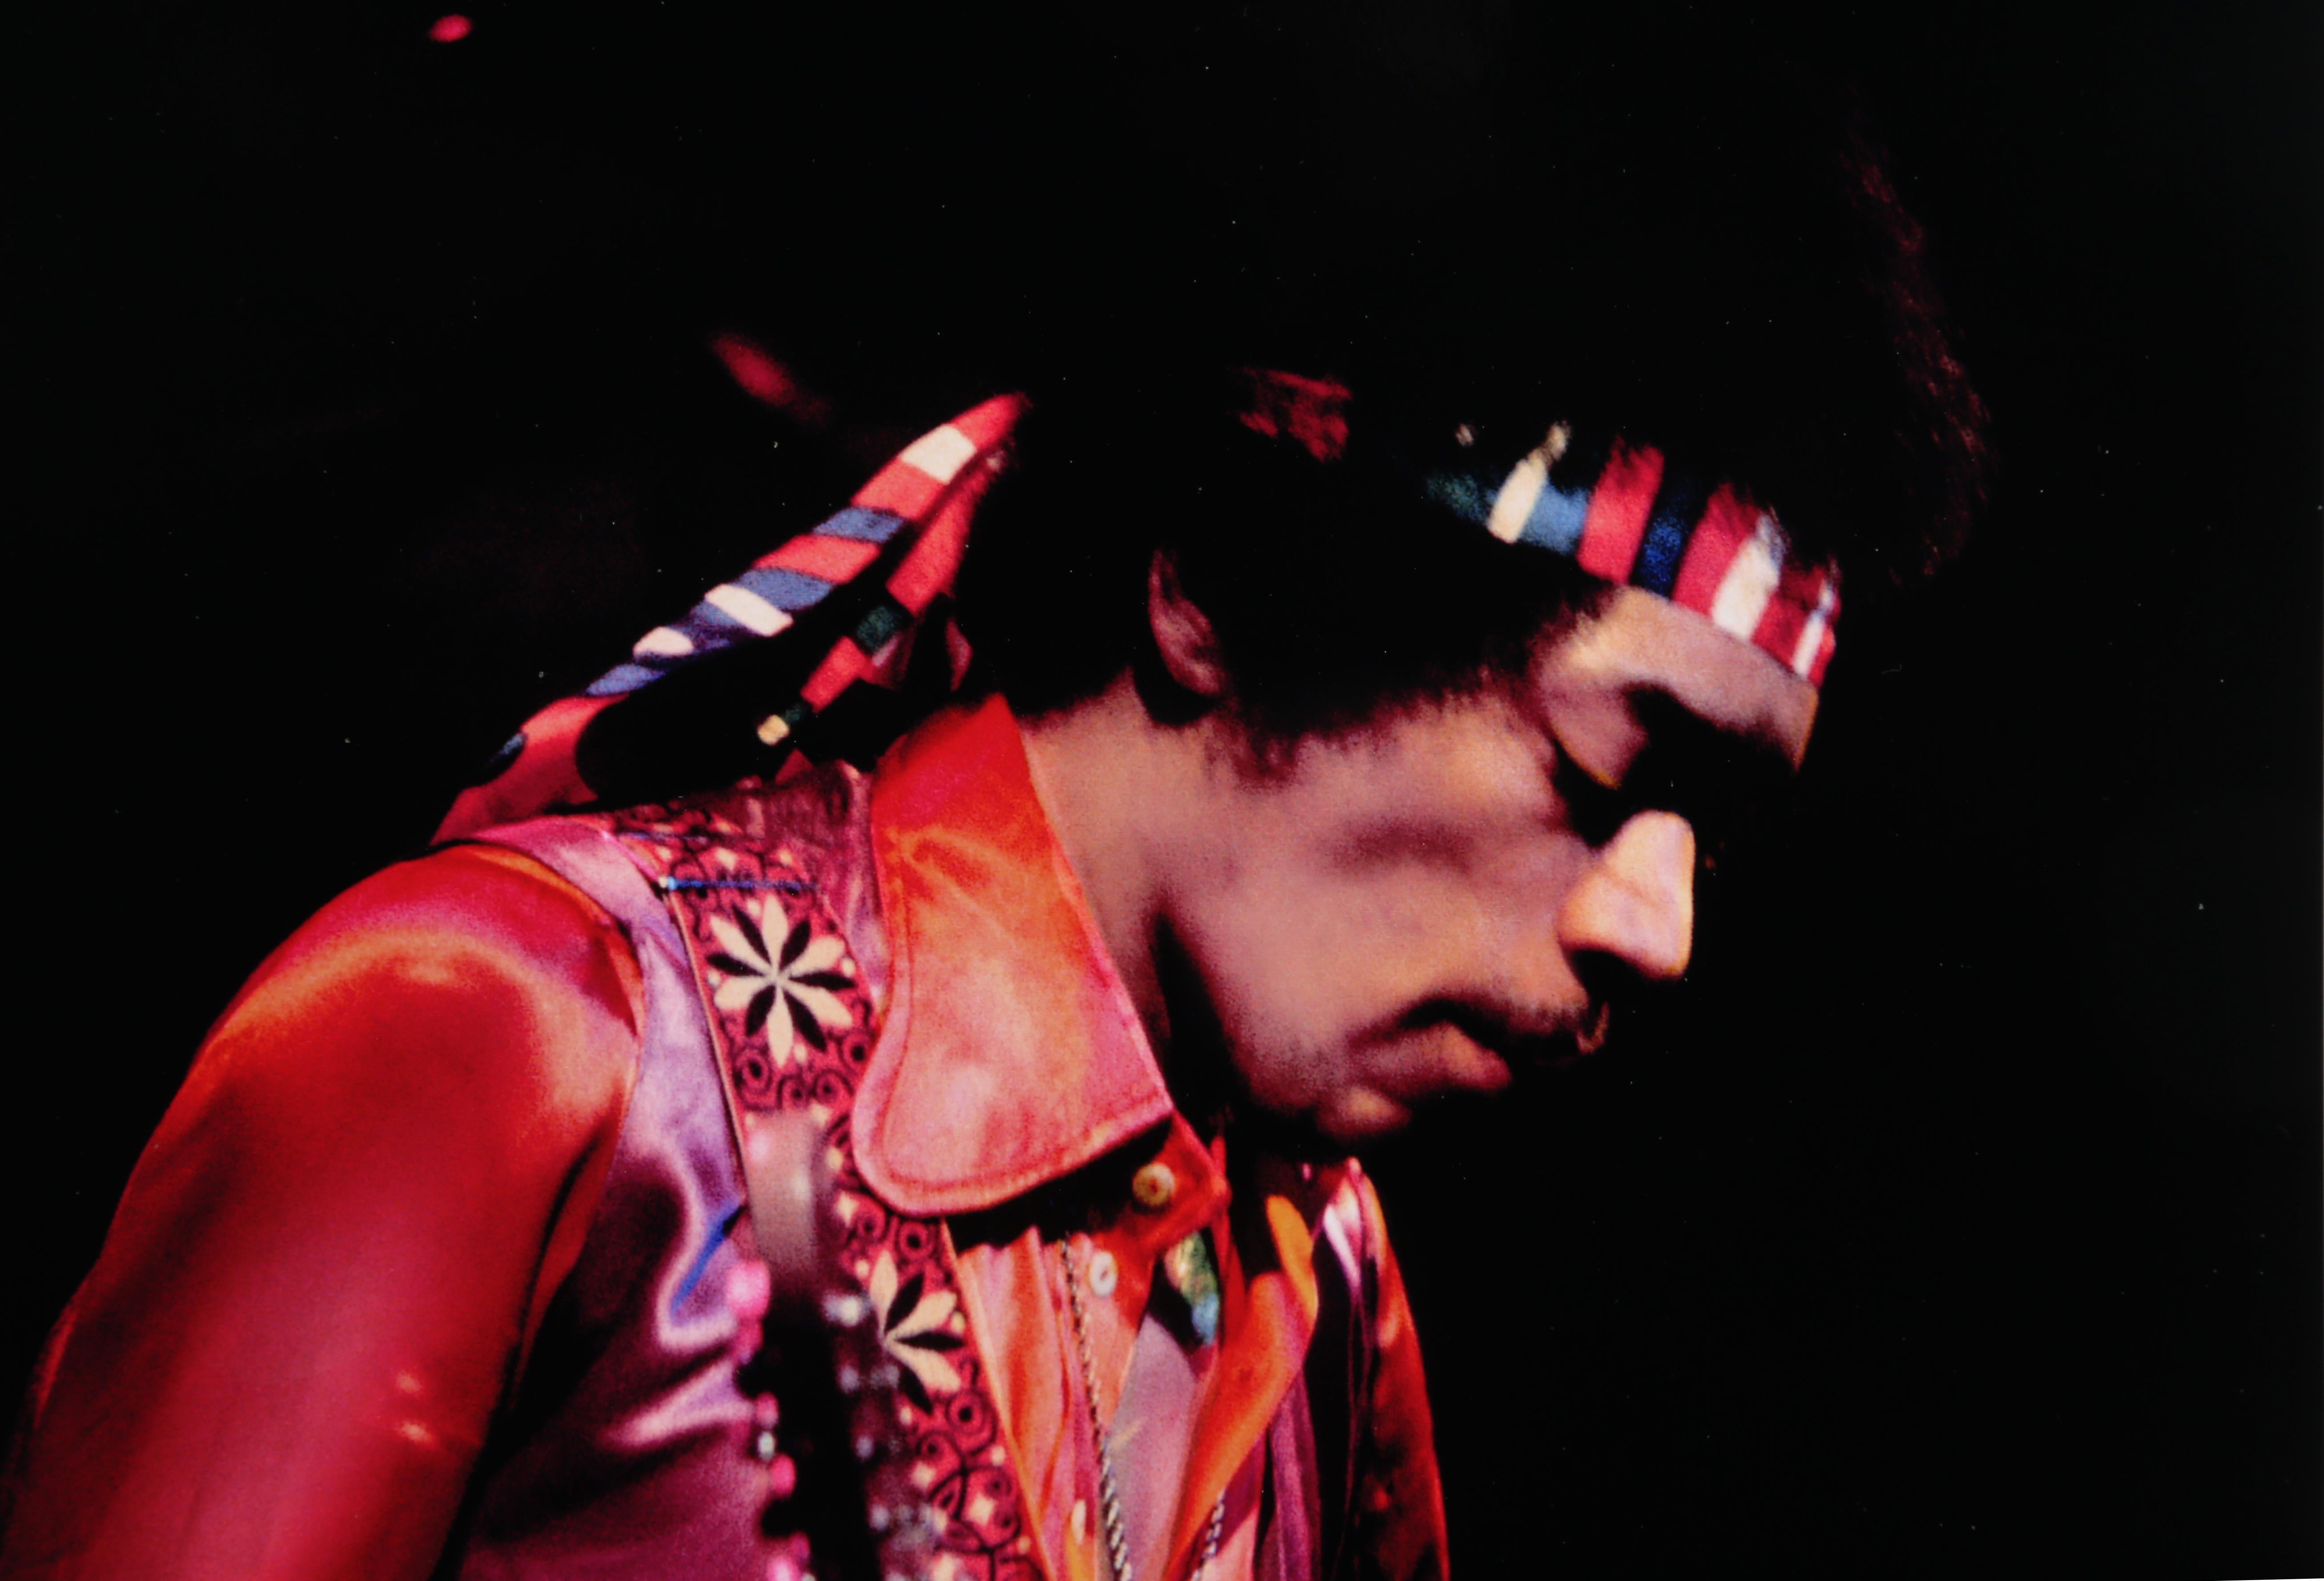 Jimi Hendrix, The Fillmore East First Show 12/31/69 - Black Portrait Photograph by Alan Herr